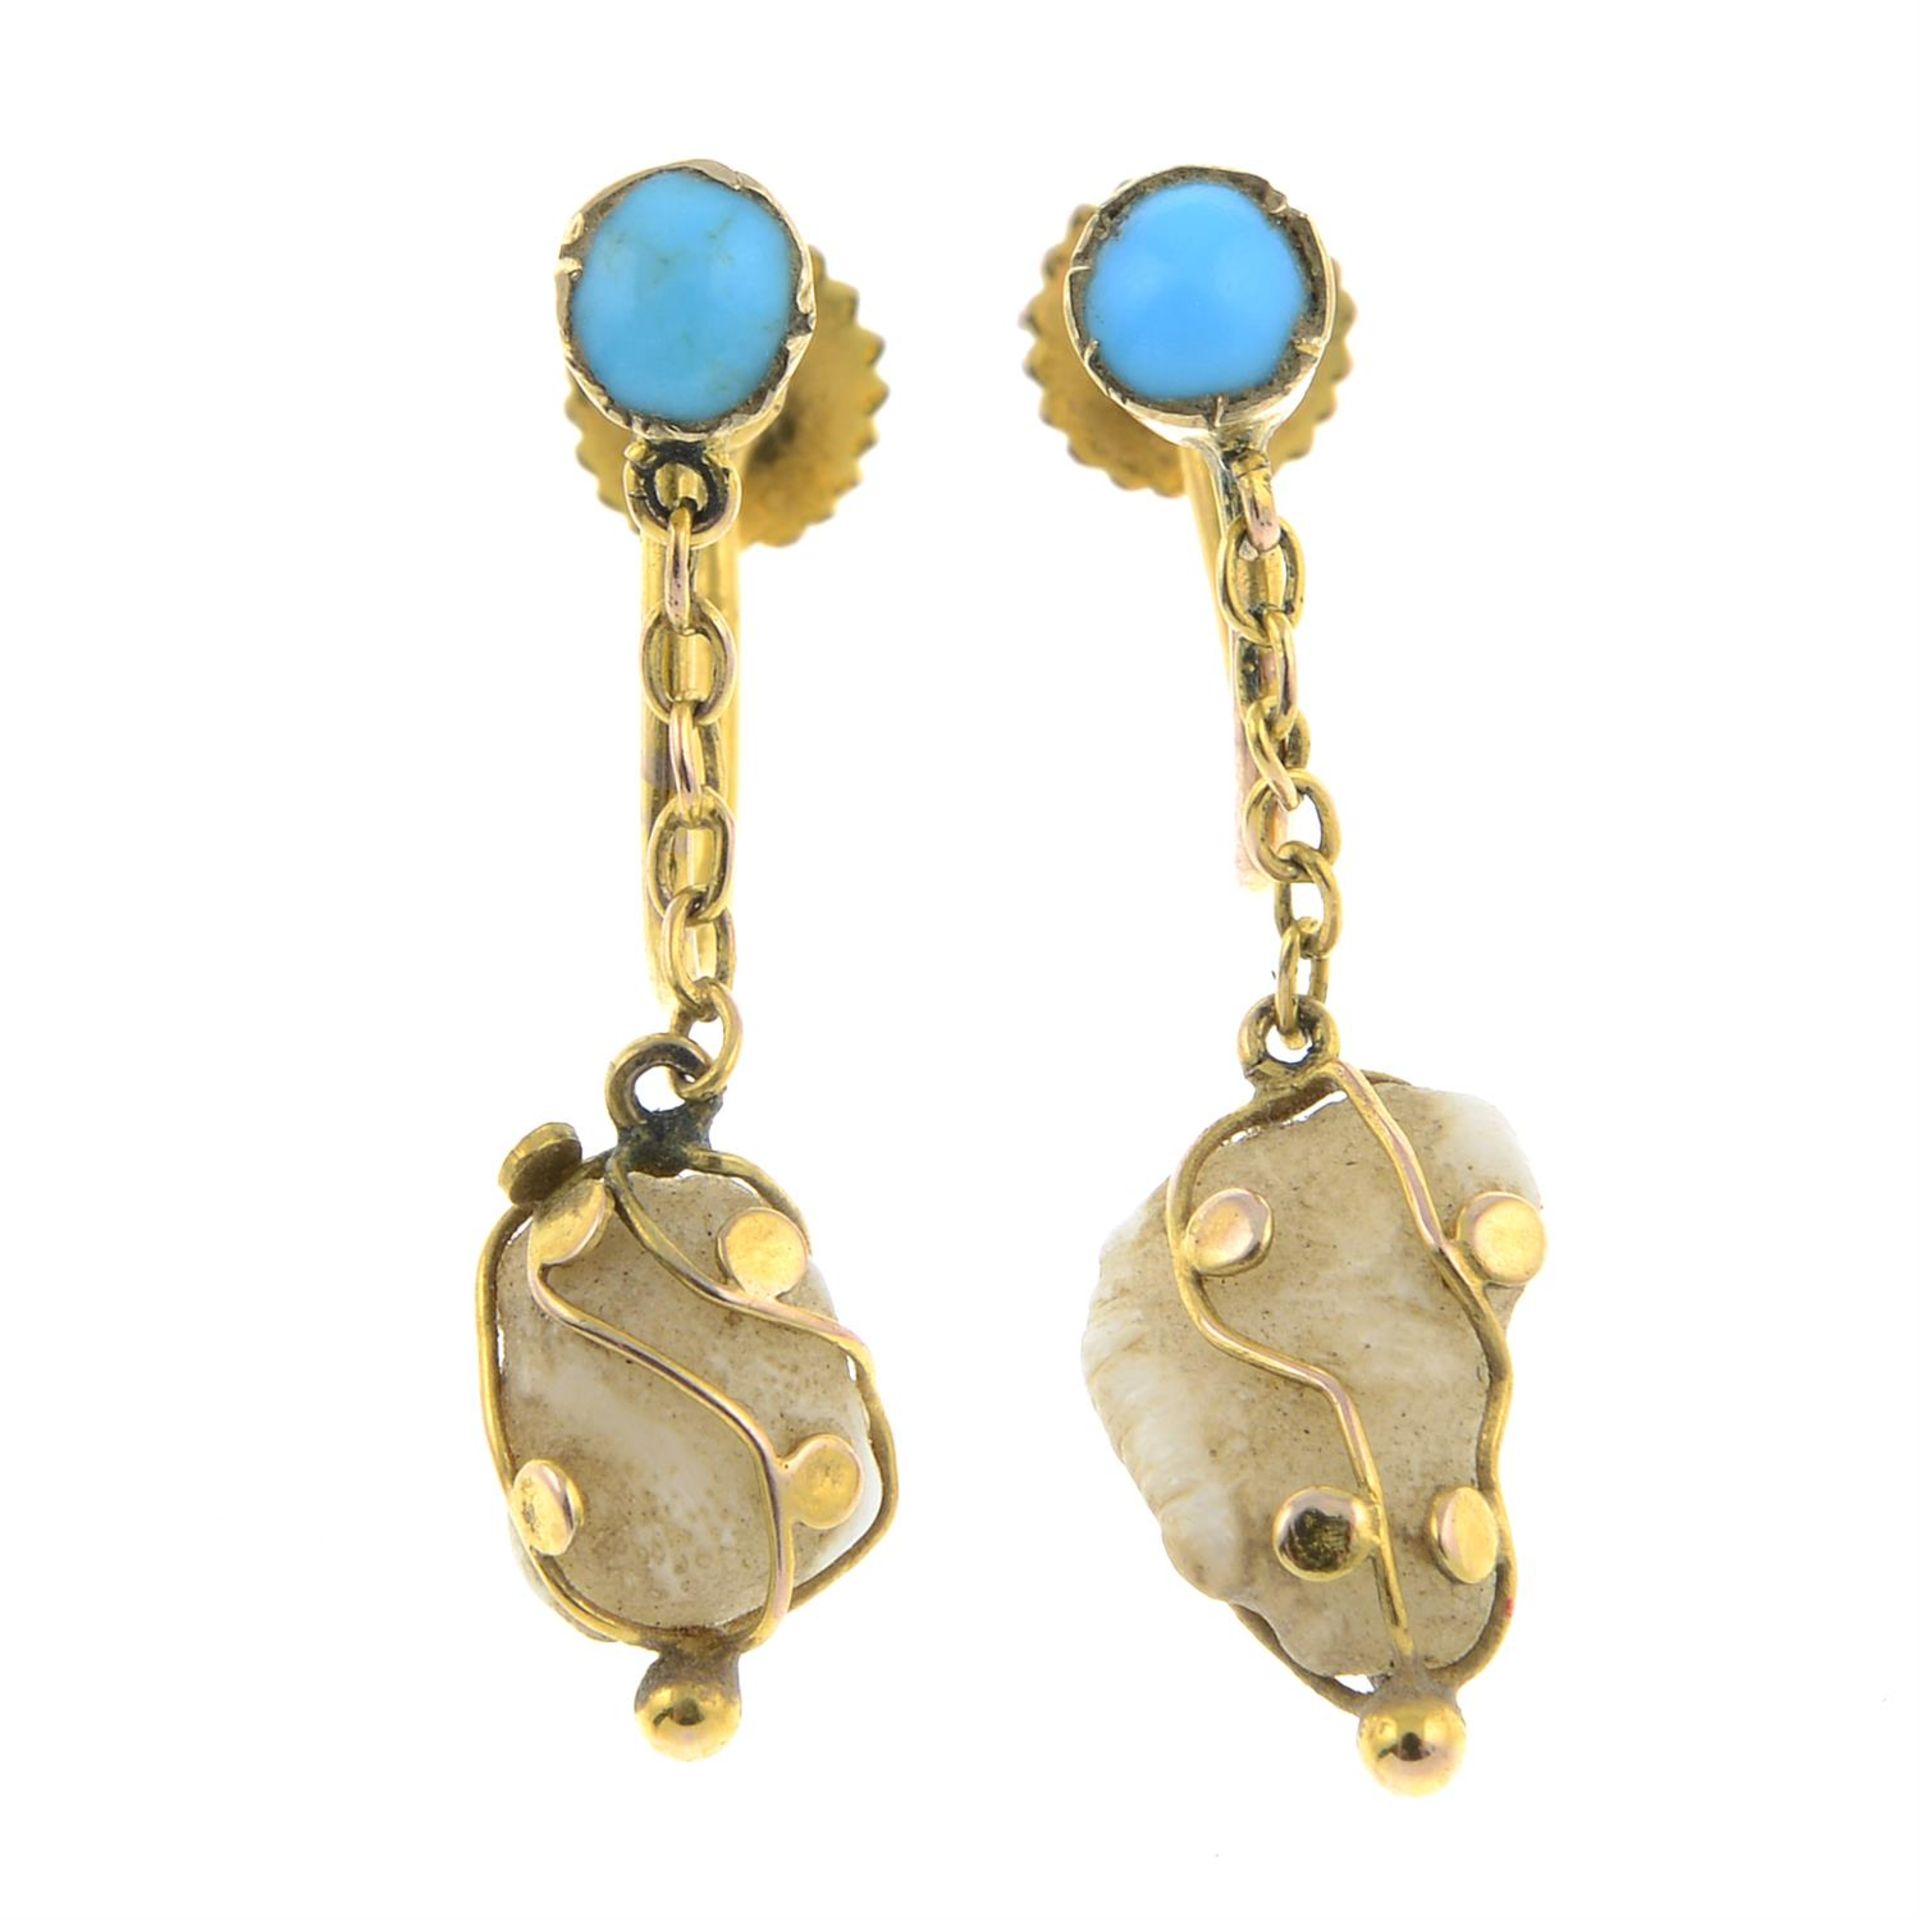 A pair of early to mid 20th century 9ct gold pearl and turquoise drop earrings.